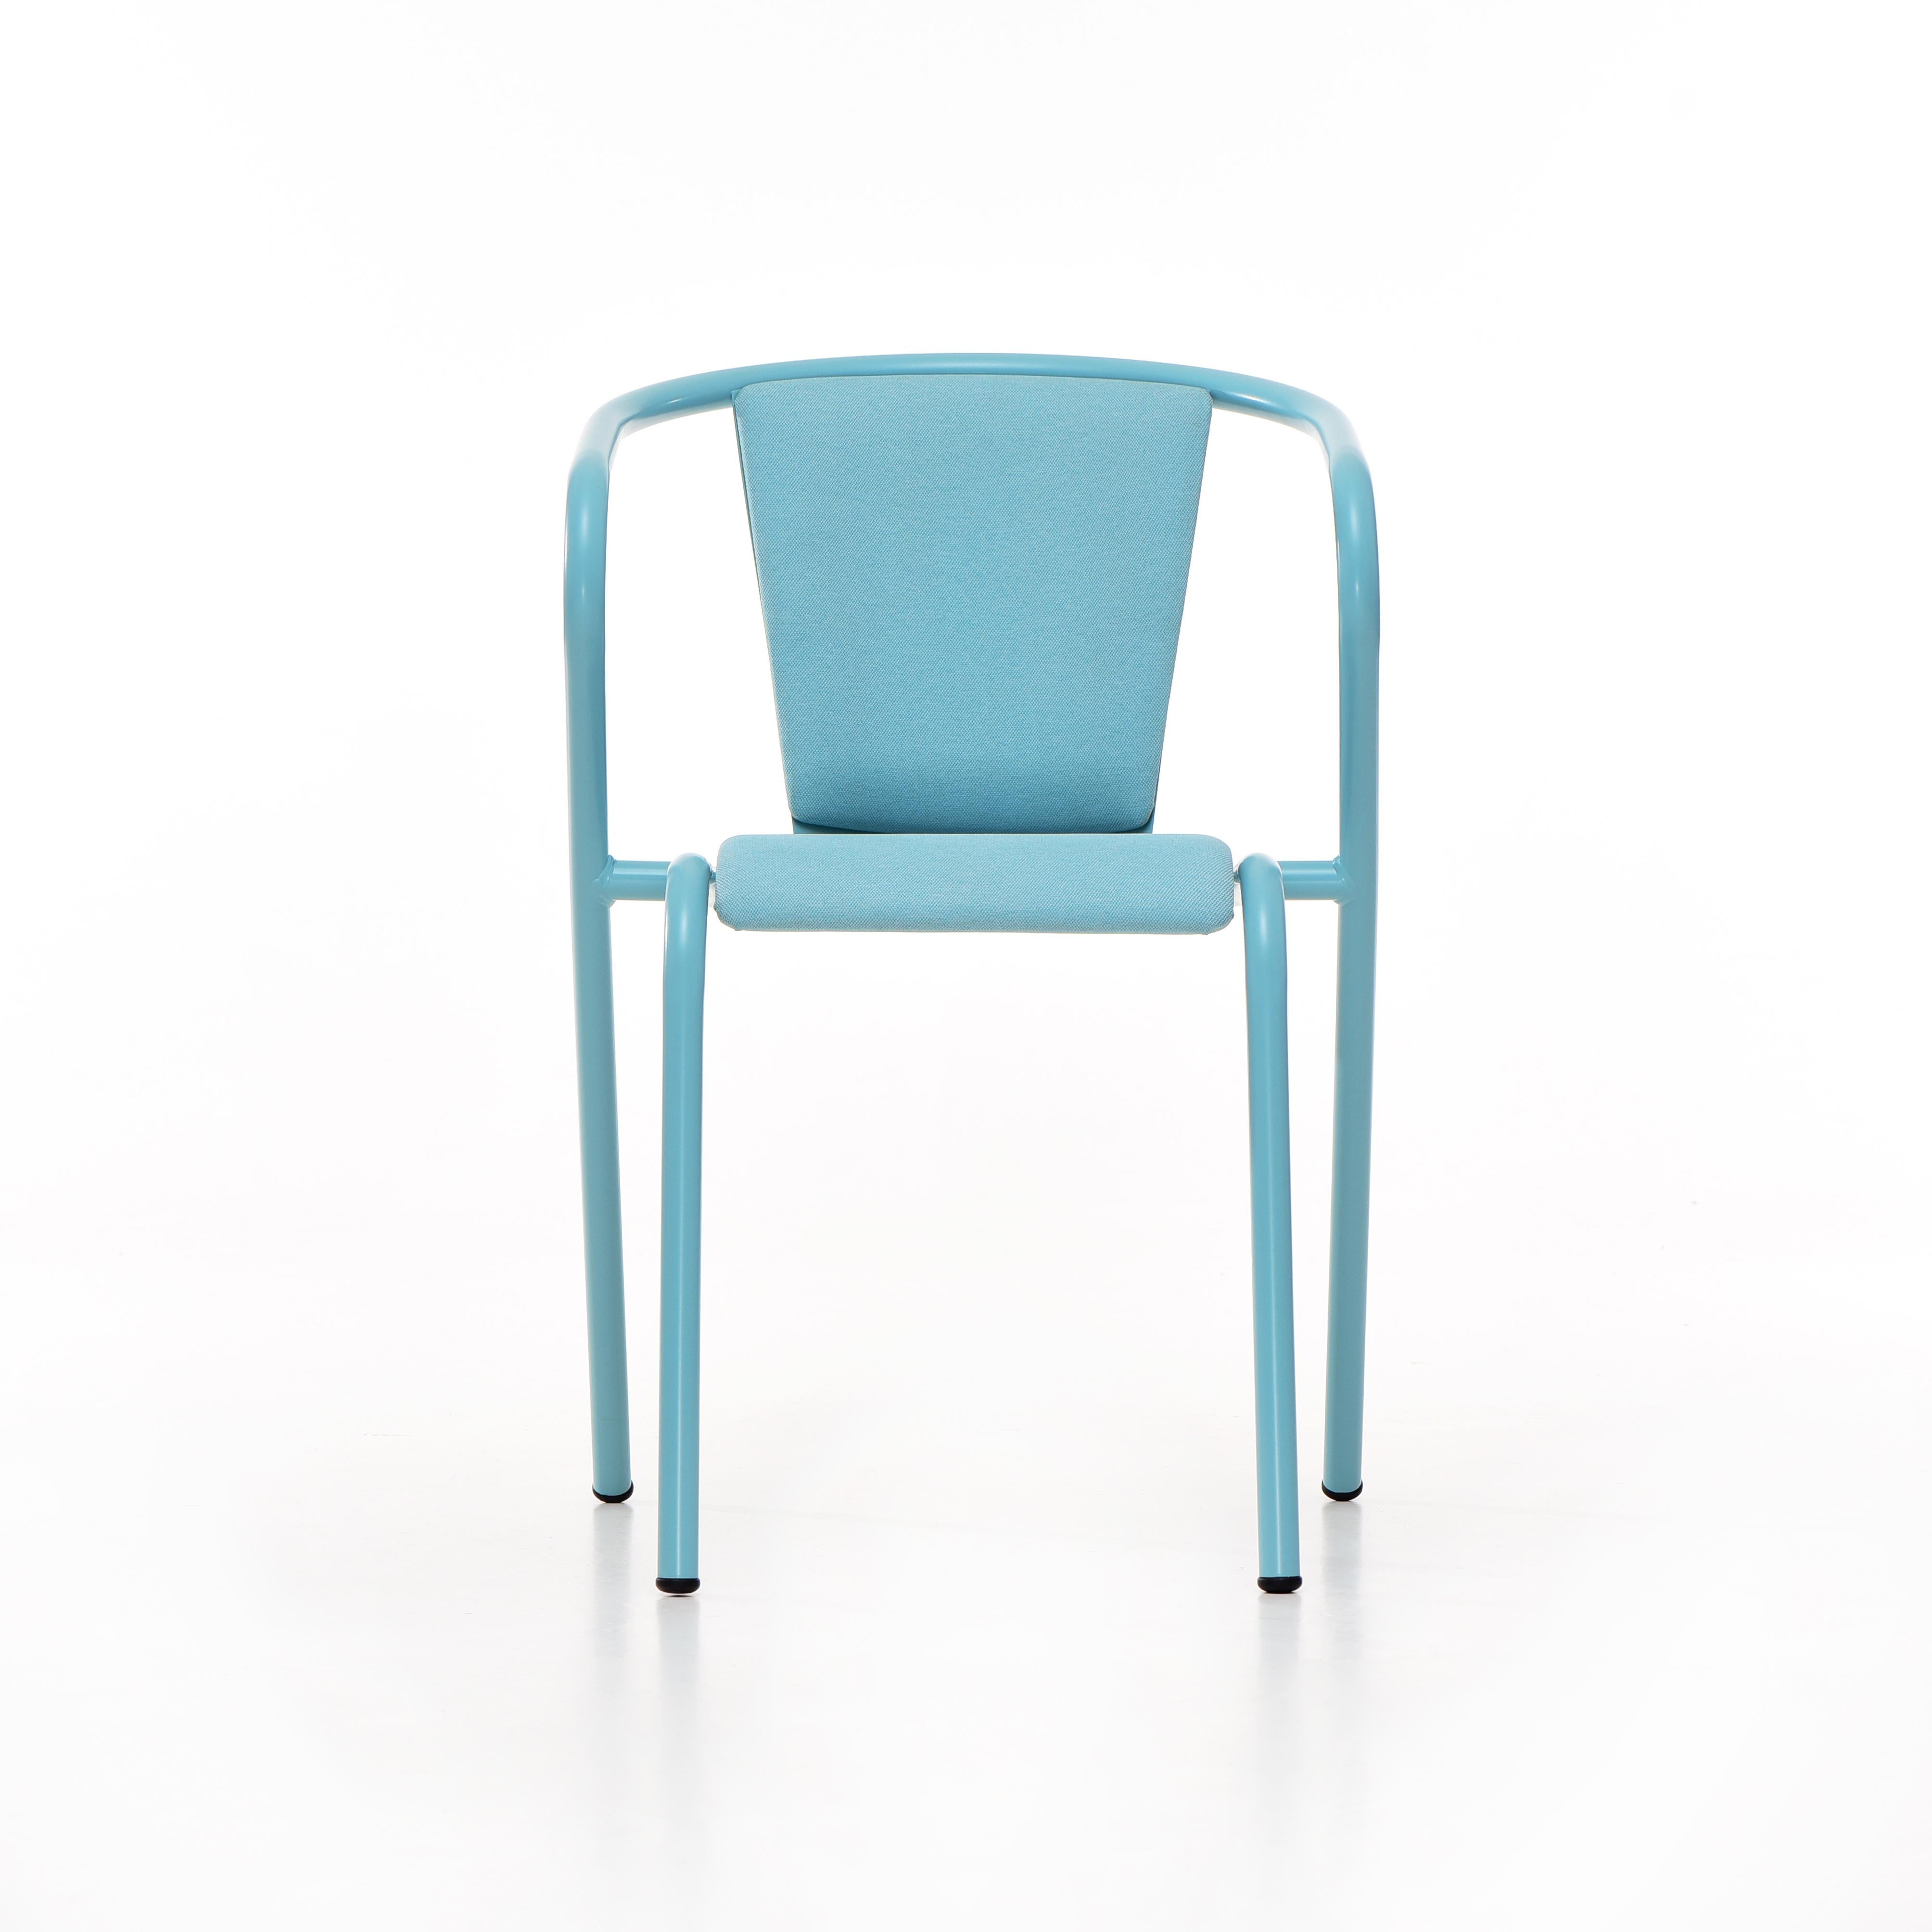 BICAchair is a sustainable stackable steel dining armchair made from recycled and recyclable steel, finished with our premium selection of powder-coating colors, in this case in aPastel Blue color, that transforms a Classic in something new and